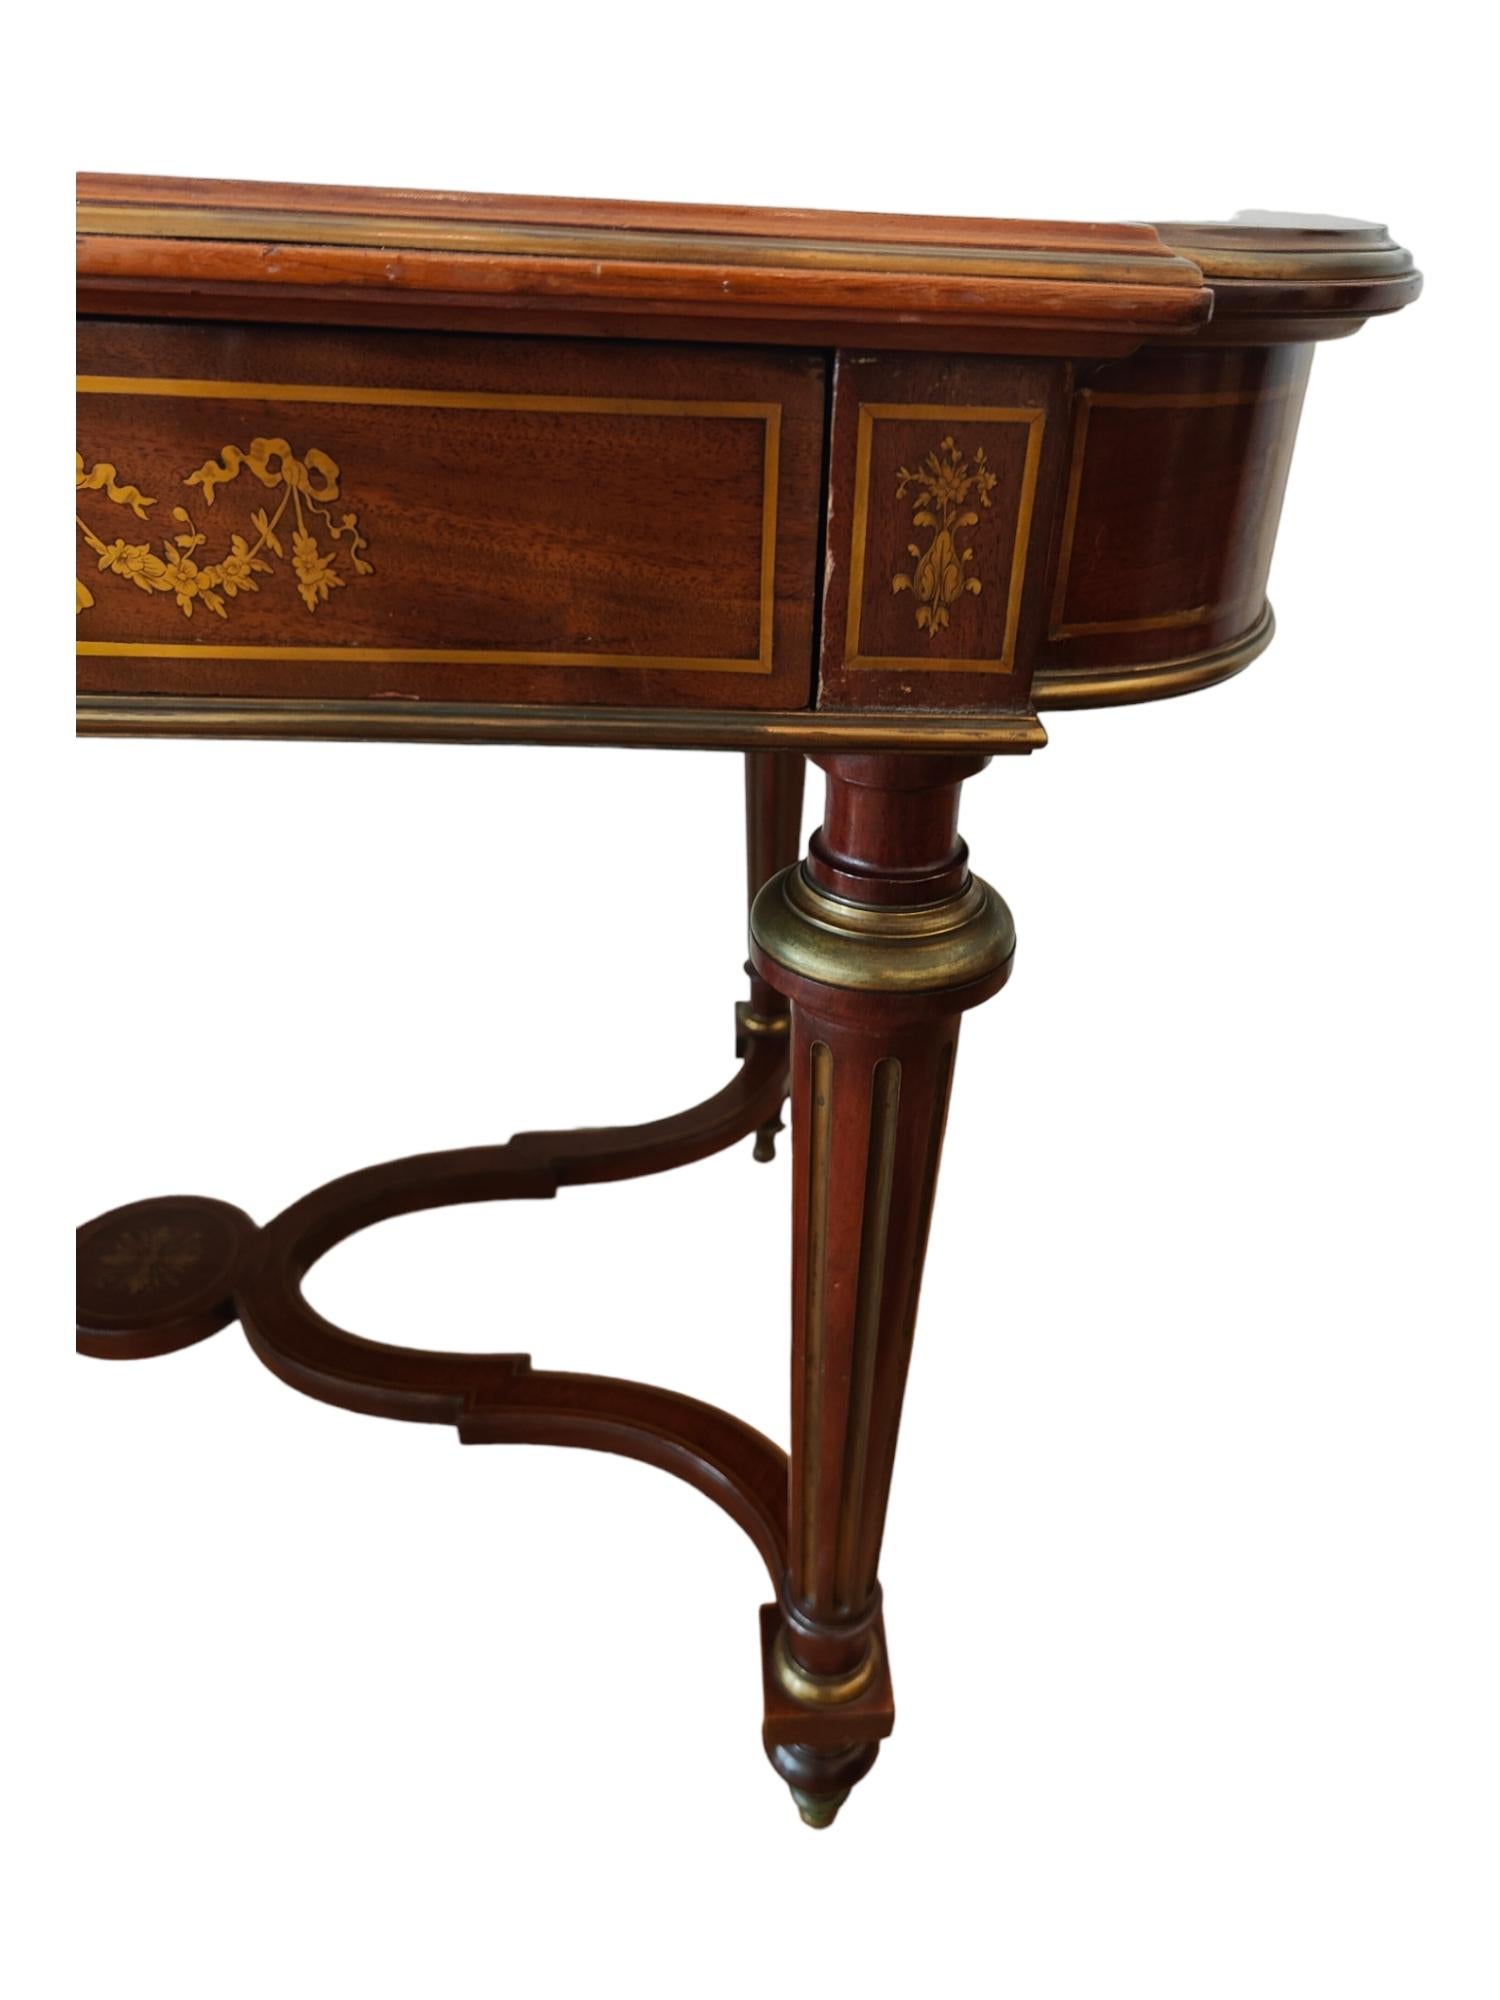 Elegant French Table with Marquetry from the 19th Century For Sale 1